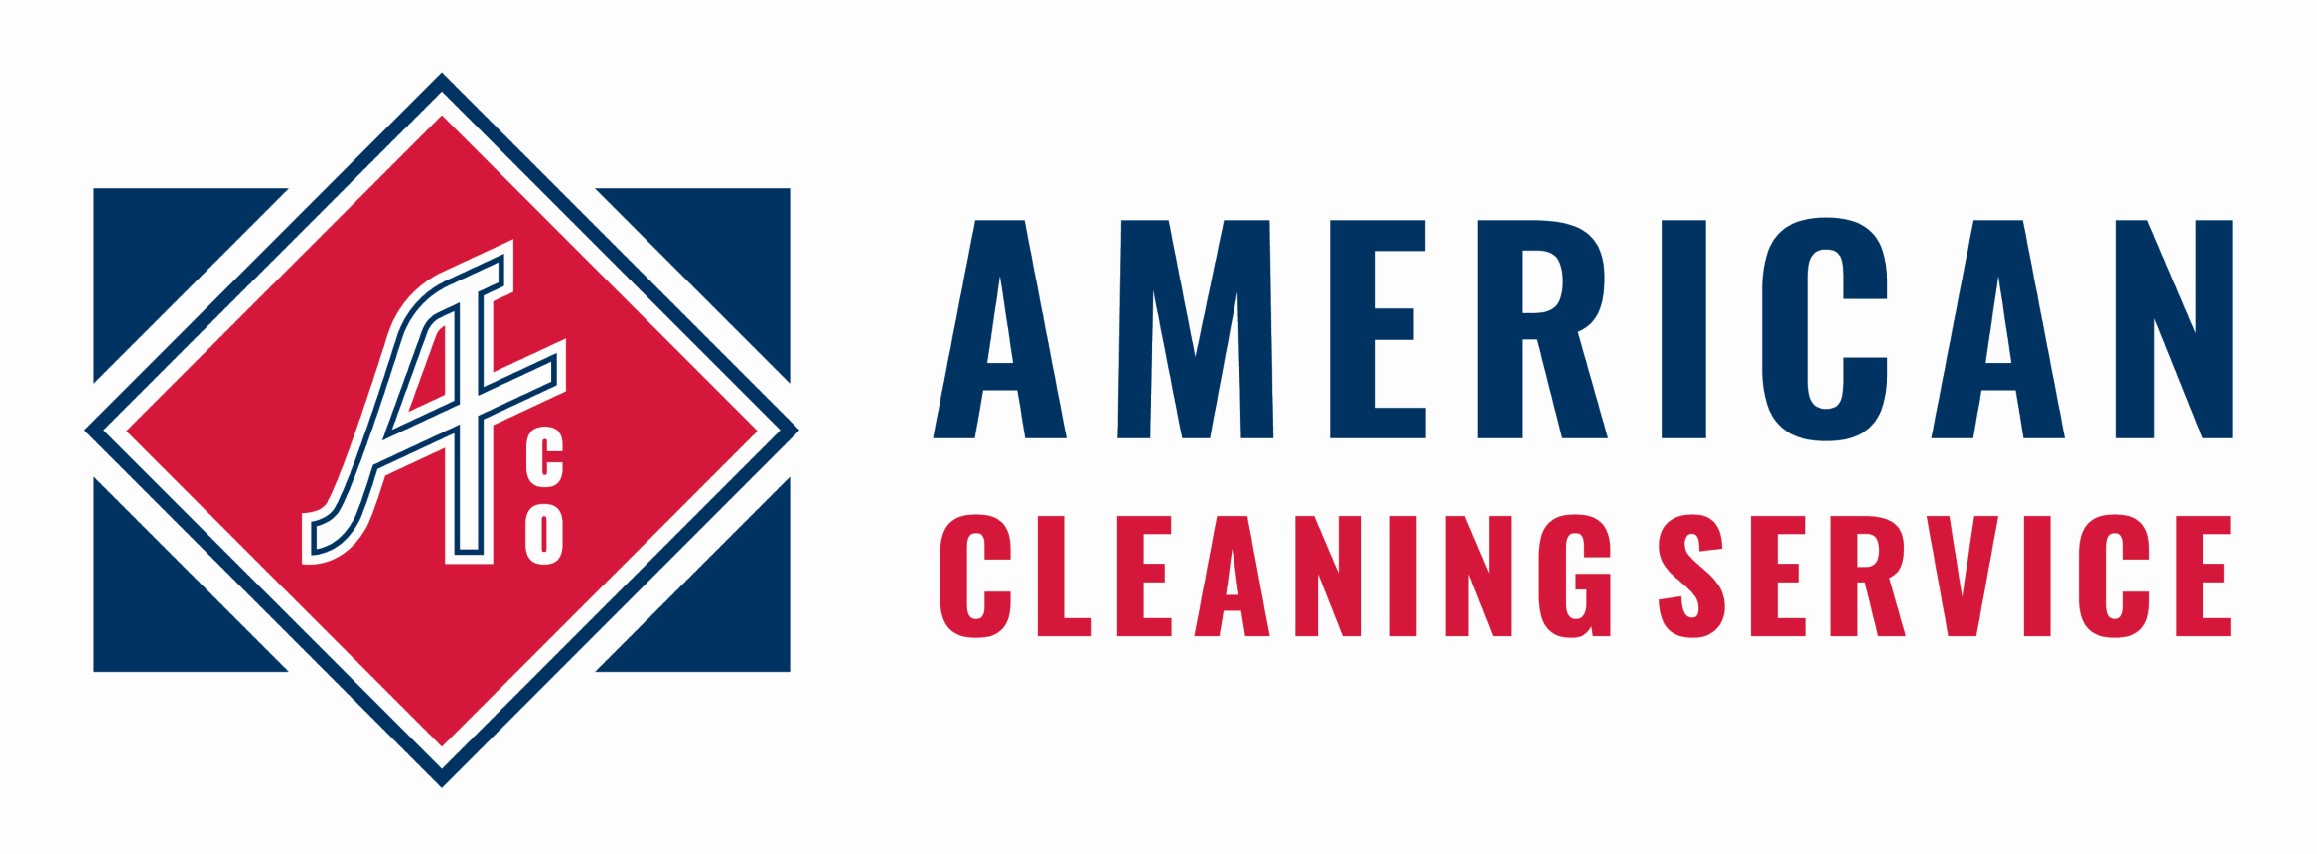 American Cleaning Services Main Logo